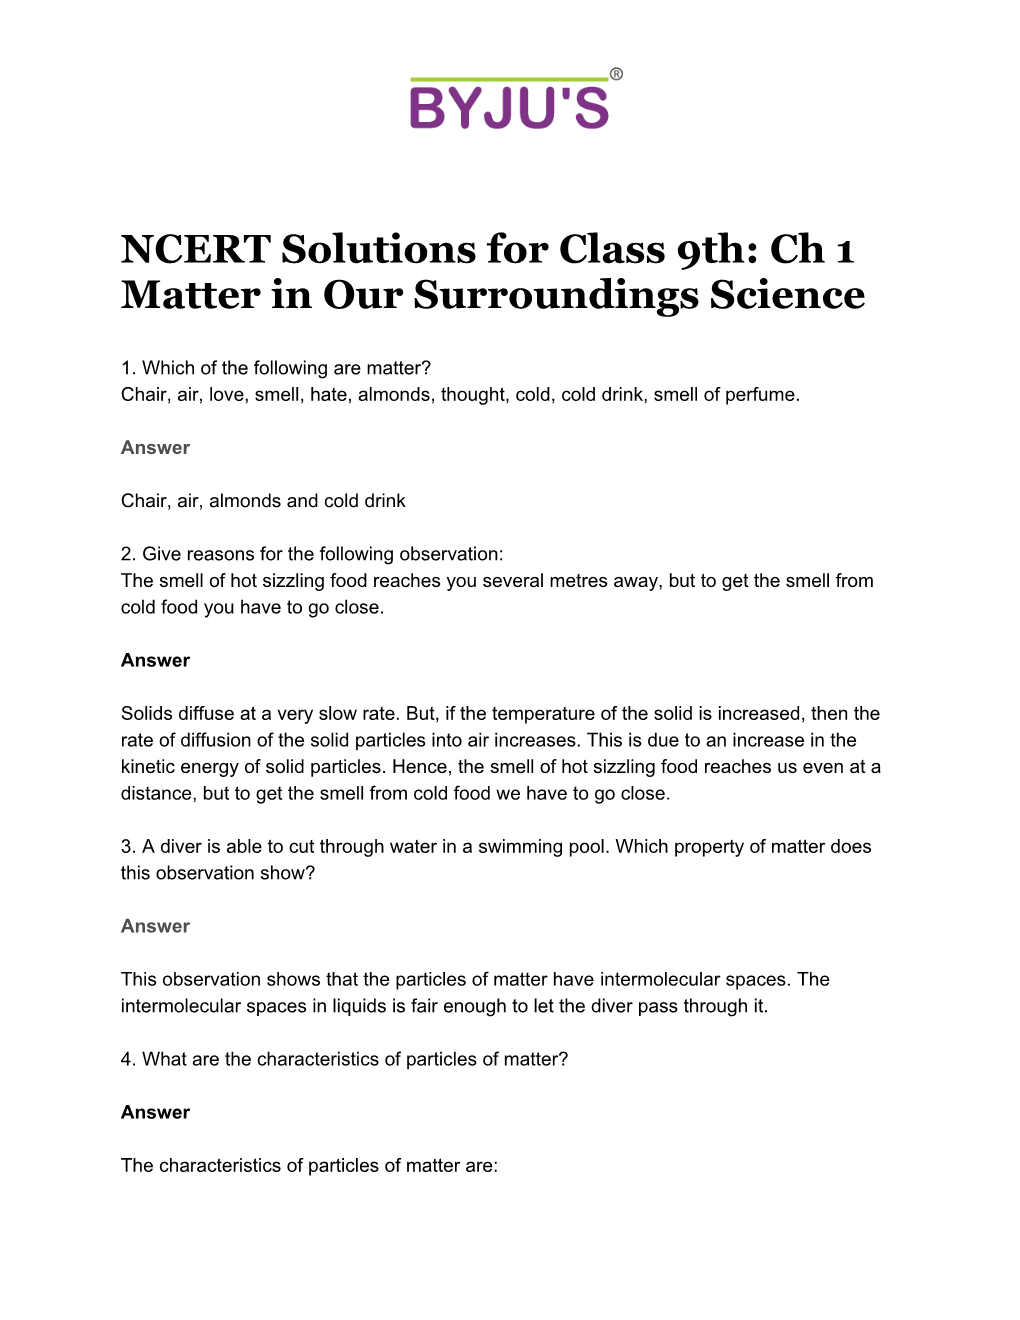 NCERT Solutions for Class 9Th: Ch 1 Matter in Our Surroundings Science